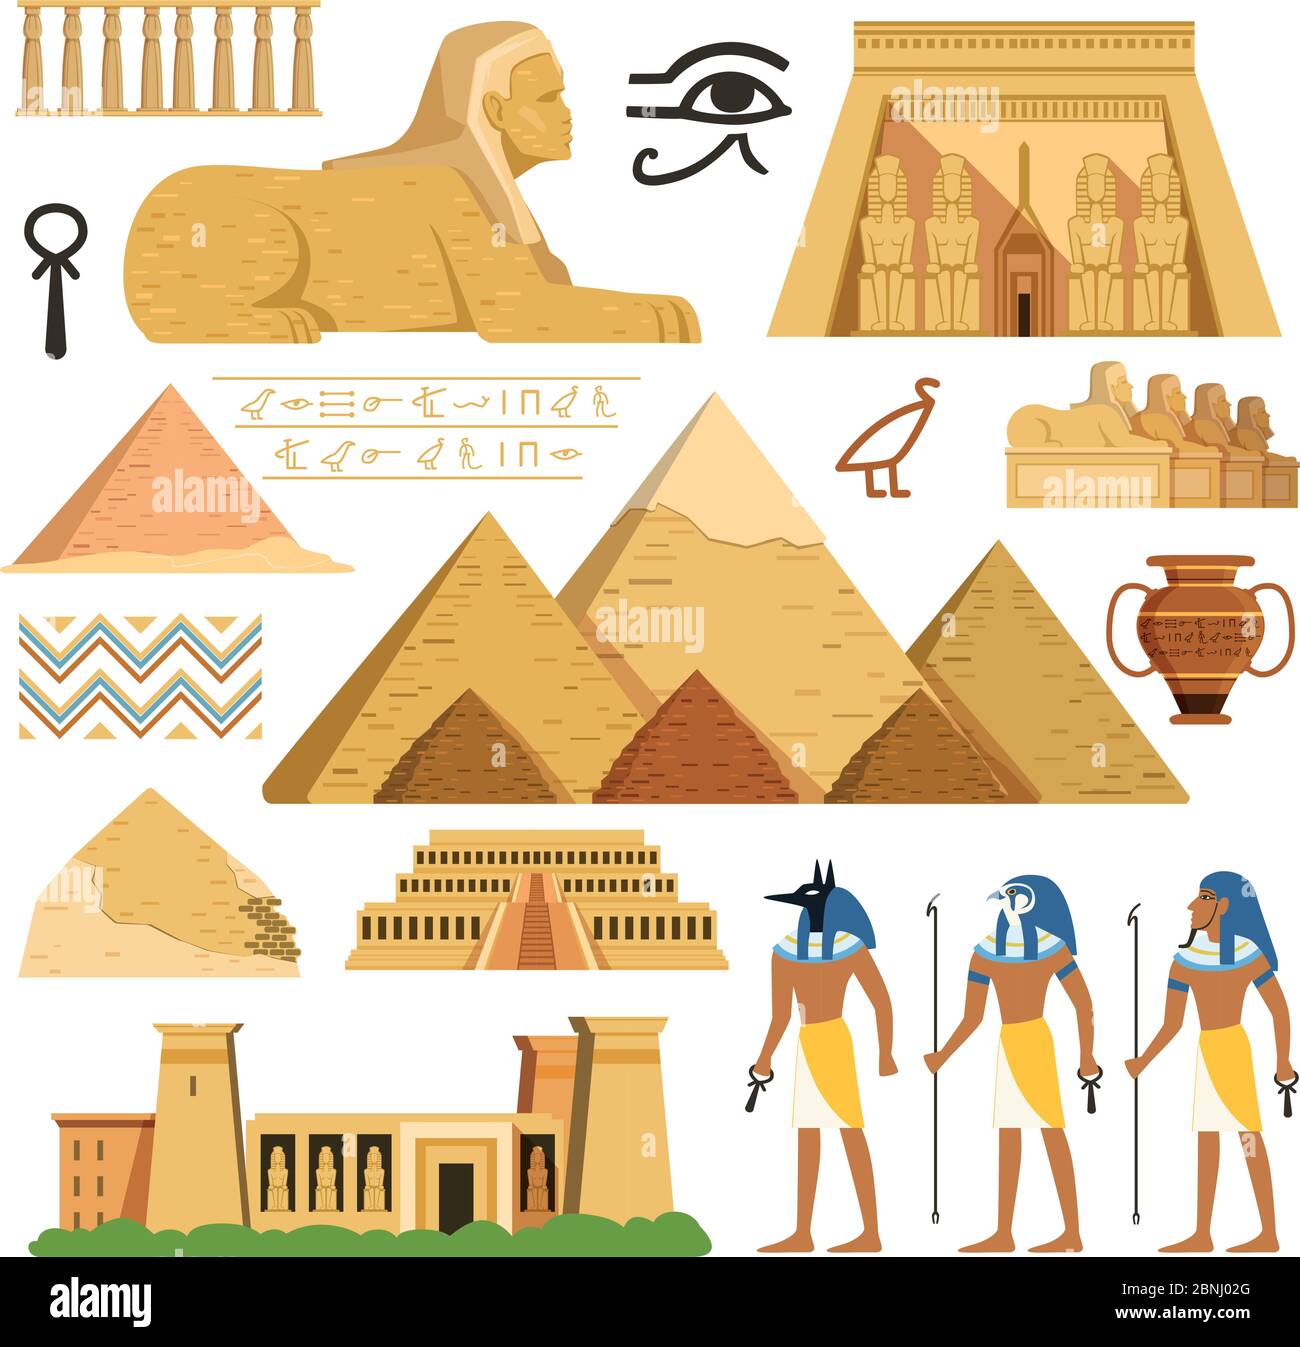 Pyramid of egypt. History landmarks. Cultural objects and symbols of egyptians Stock Vector